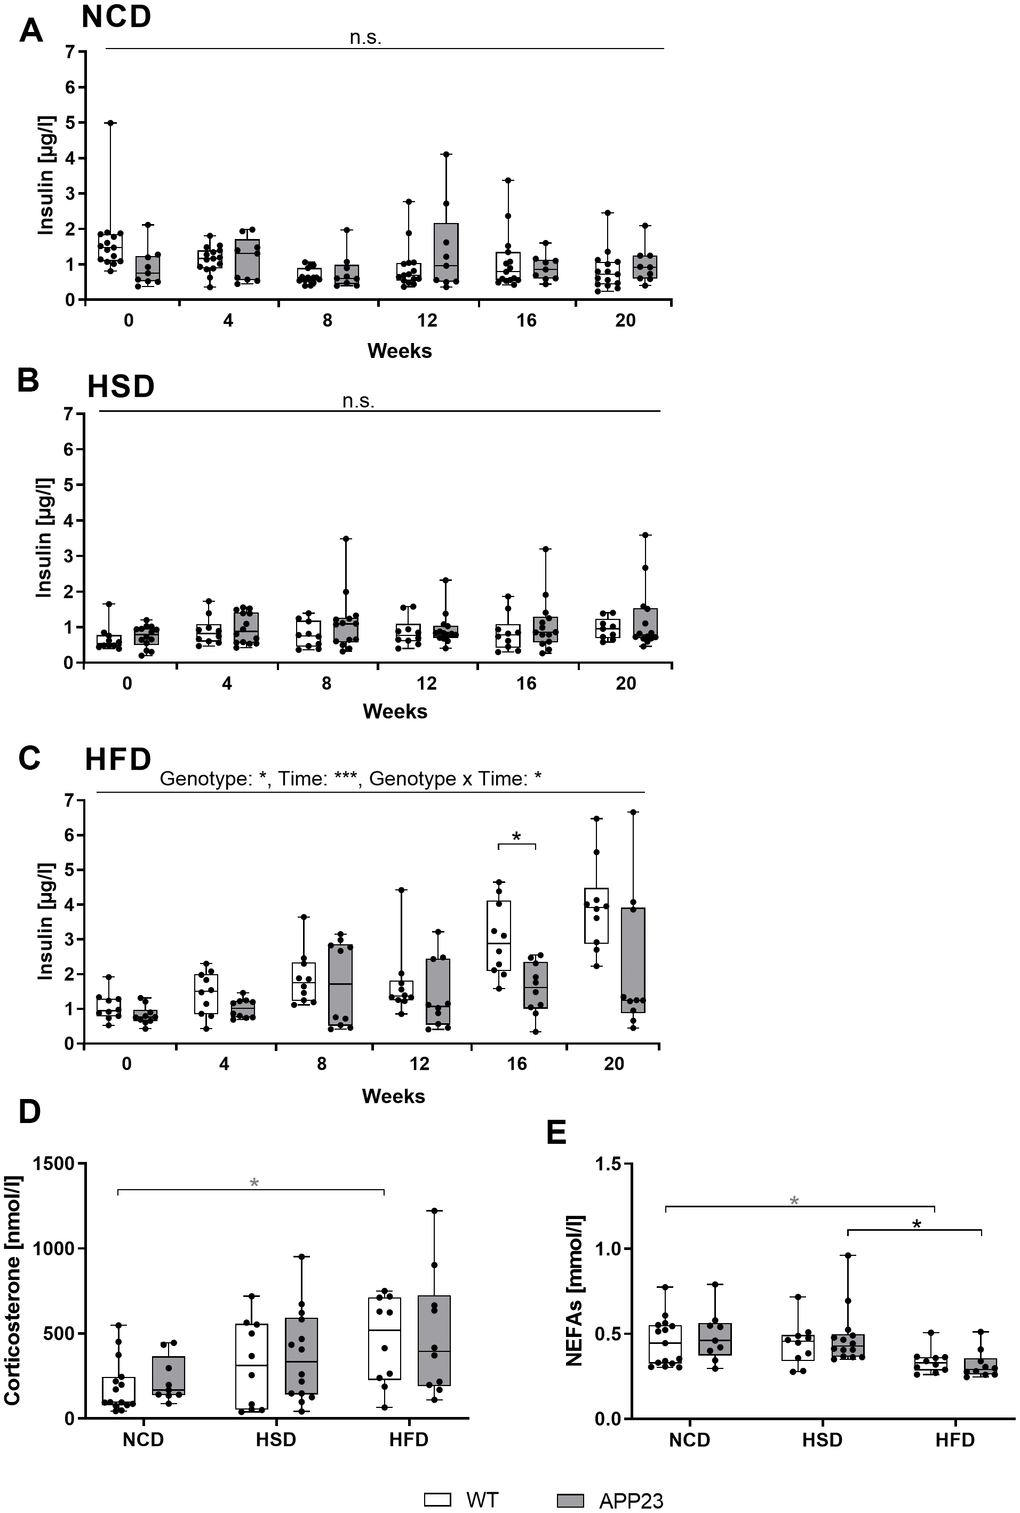 Analysis of basic metabolic parameters in blood of fed mice. (A–C) Plasma insulin measured in NCD-fed (A), HSD-fed (B) and HFD-fed (C) mice at baseline (week 0) and after 4, 8, 12, 16, and 20 weeks of diet. Corticosterone levels (D) and NEFA levels (E) measured in blood plasma obtained upon sacrifice after 20 weeks of diet. Data are represented as box (25th to 75th percentile) with median and whiskers from minimum to maximum. Black asterisks indicate significant differences between groups (*: pA–C) and nonparametric multiple contrast Tukey-type test (D, E). nNCD WT=15, nNCD APP23=9, nHSD WT=10, nHSD APP23=14, nHFD WT=10, nHFD APP23=10.